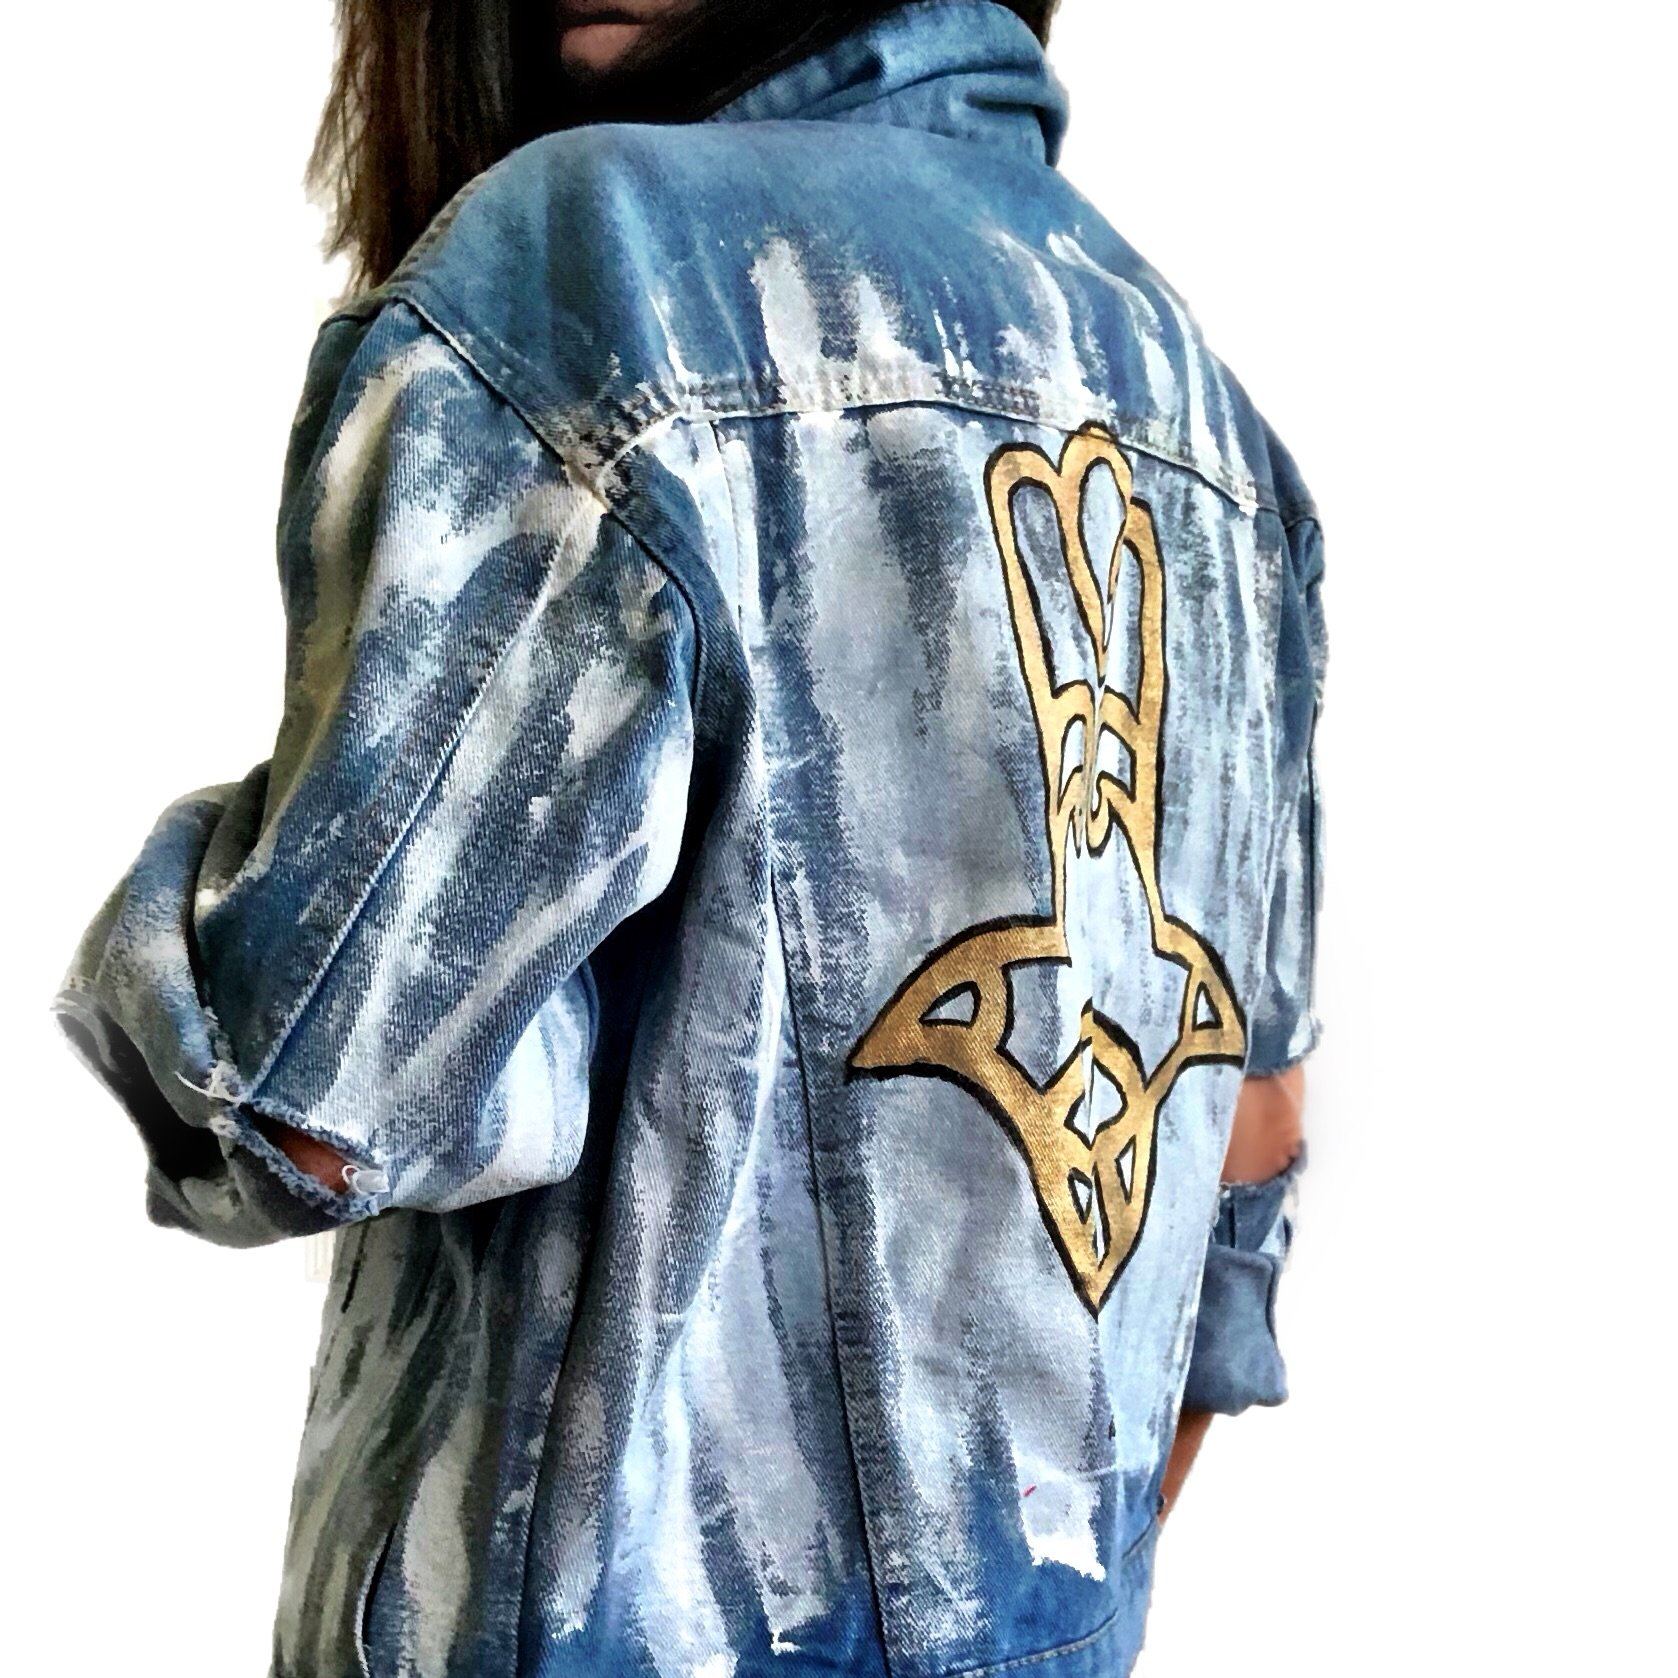 Medium blue denim wash. 'White base all over, with black and gold Hamsa painted on the back. Signed @wrenandglory.